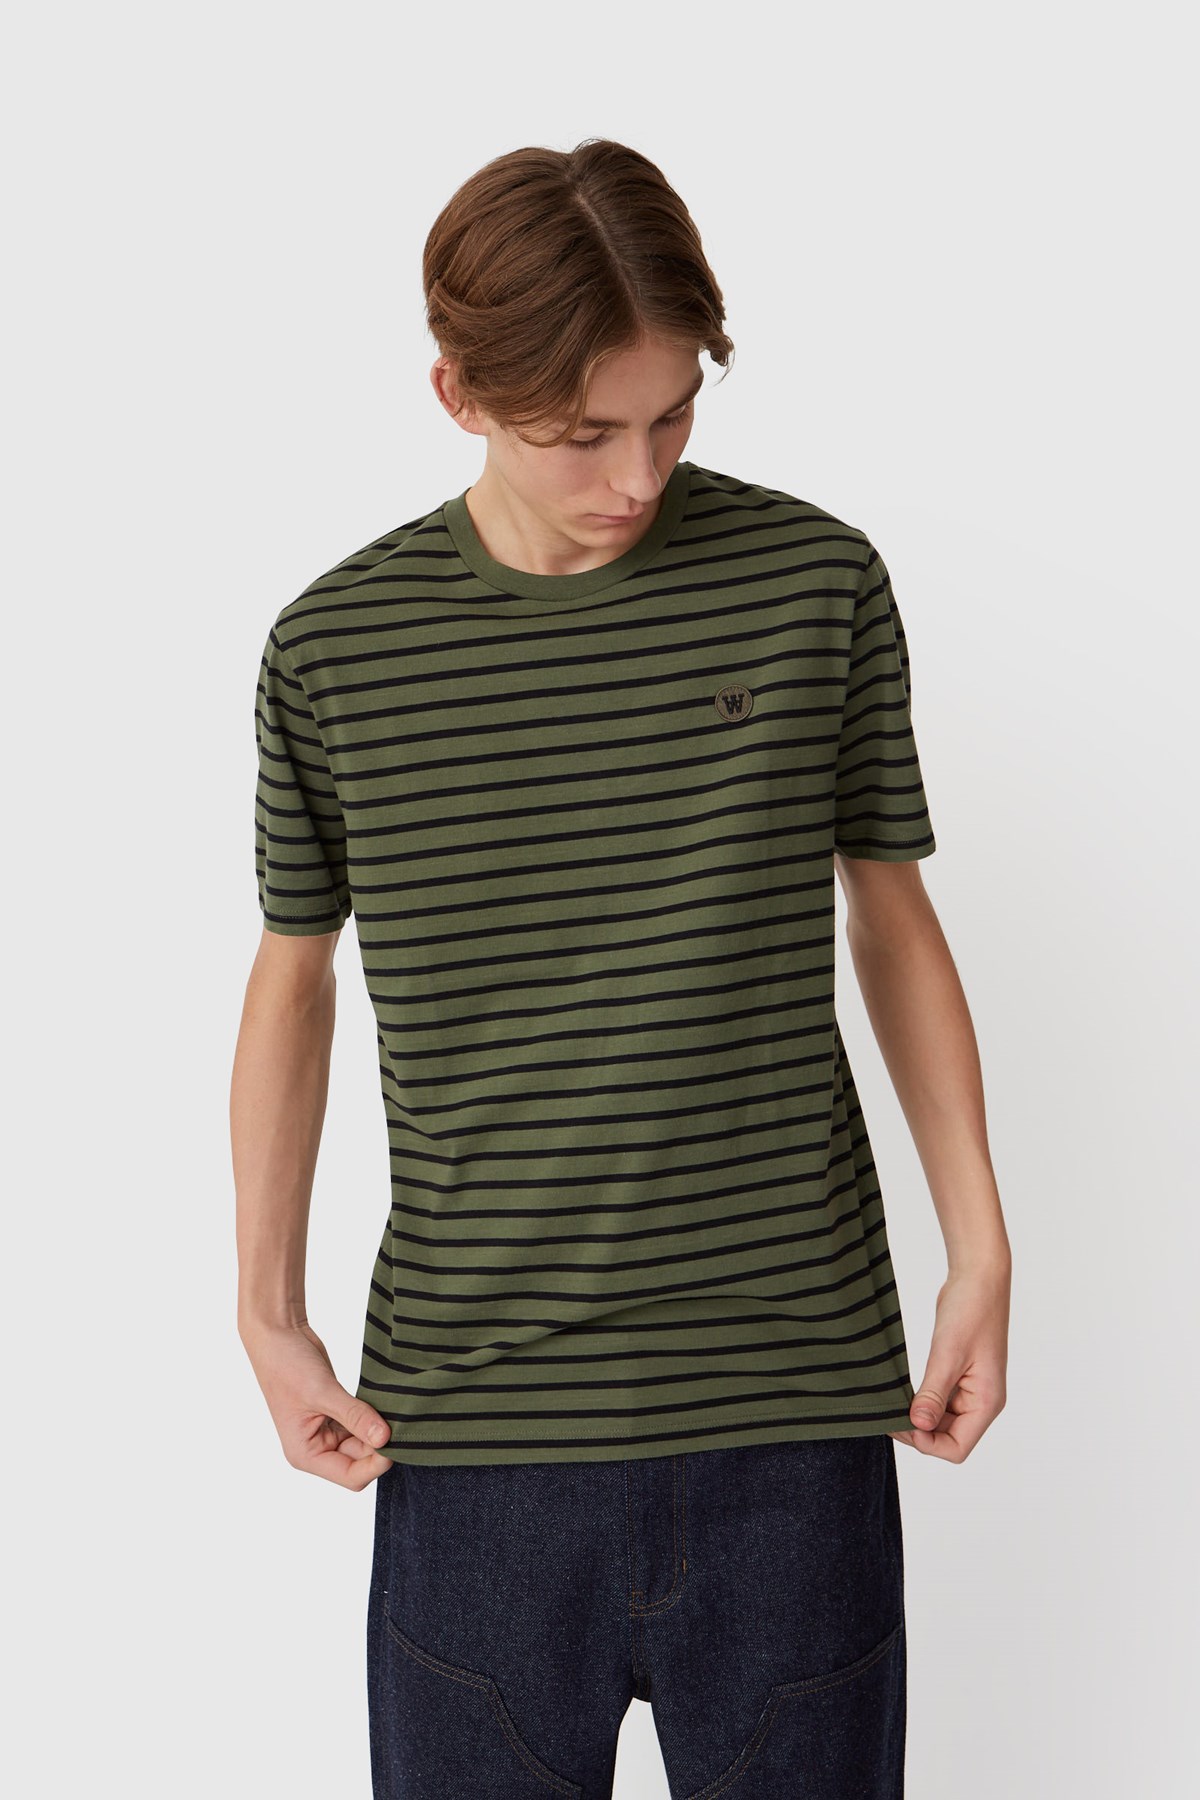 Double A by Wood Wood Ace T-shirt Army/black stripes | WoodWood.com